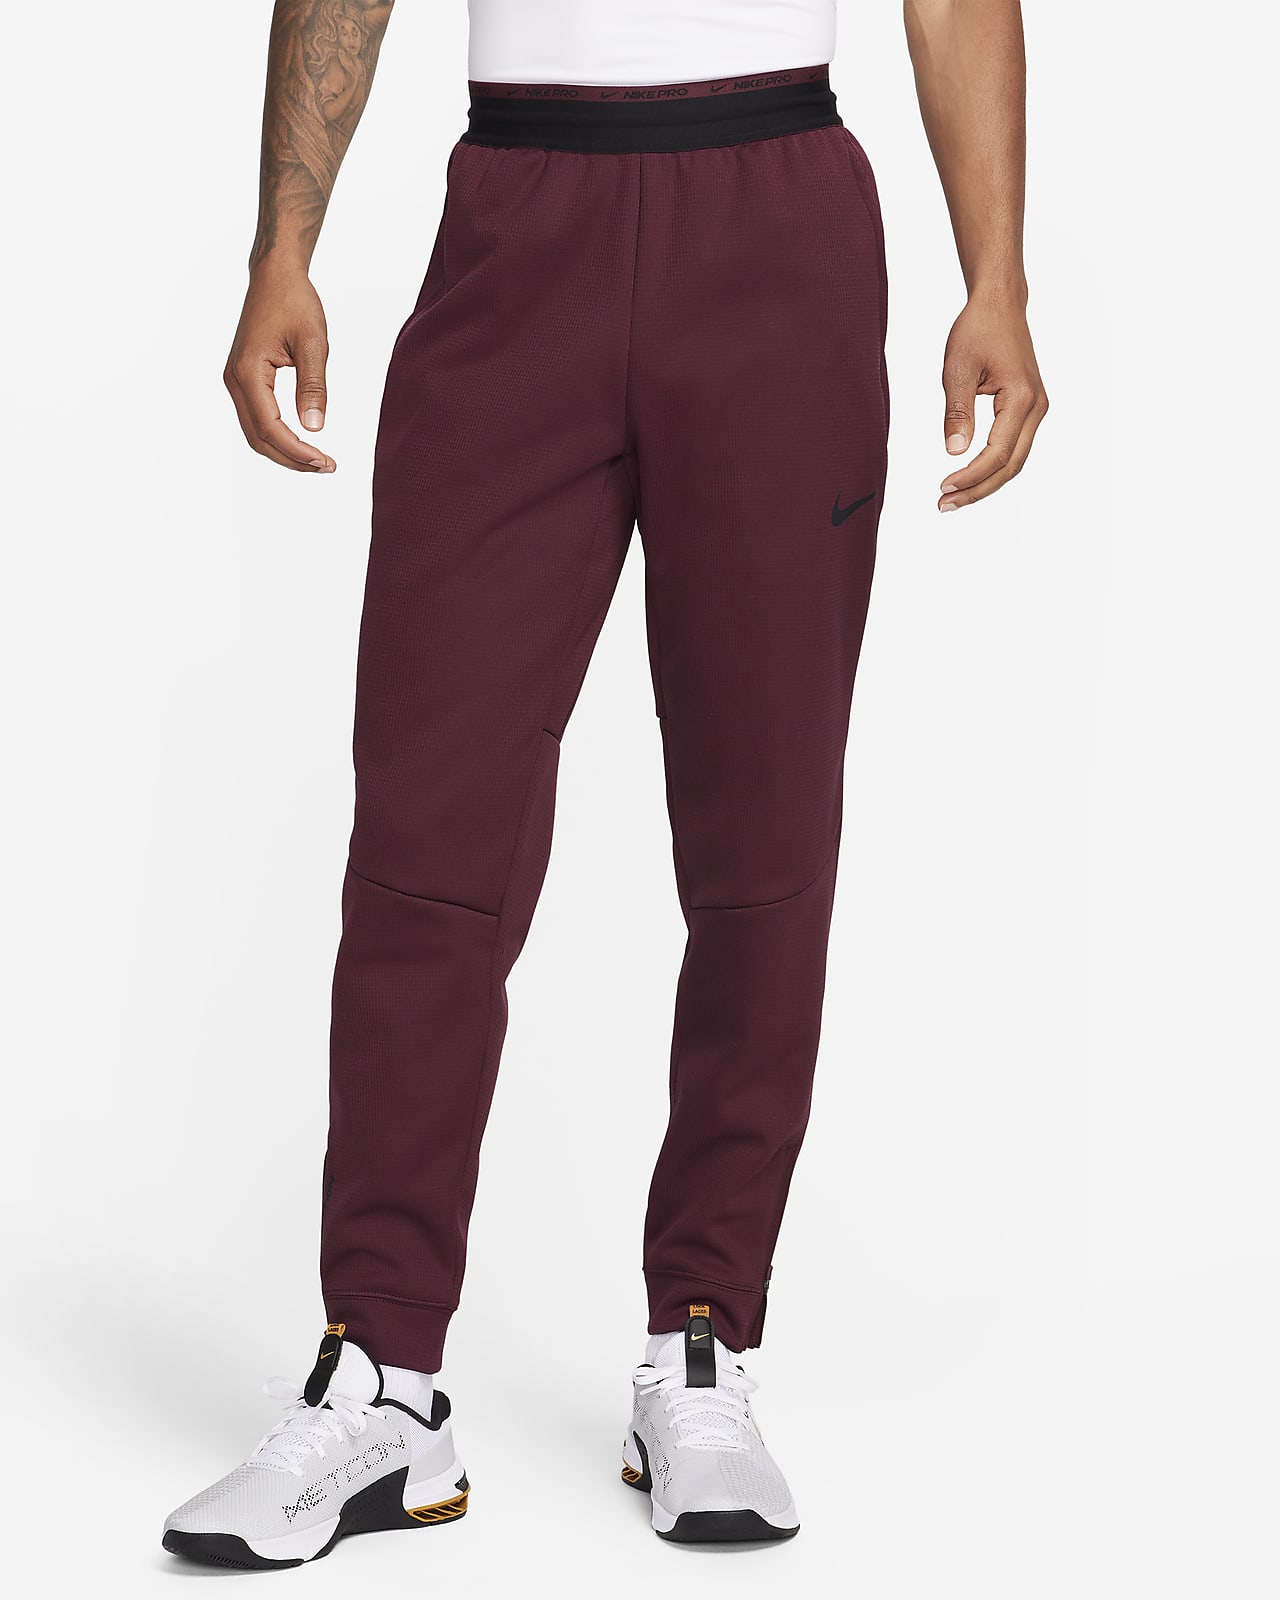 Trousers & Sweatpants, Gym Trousers